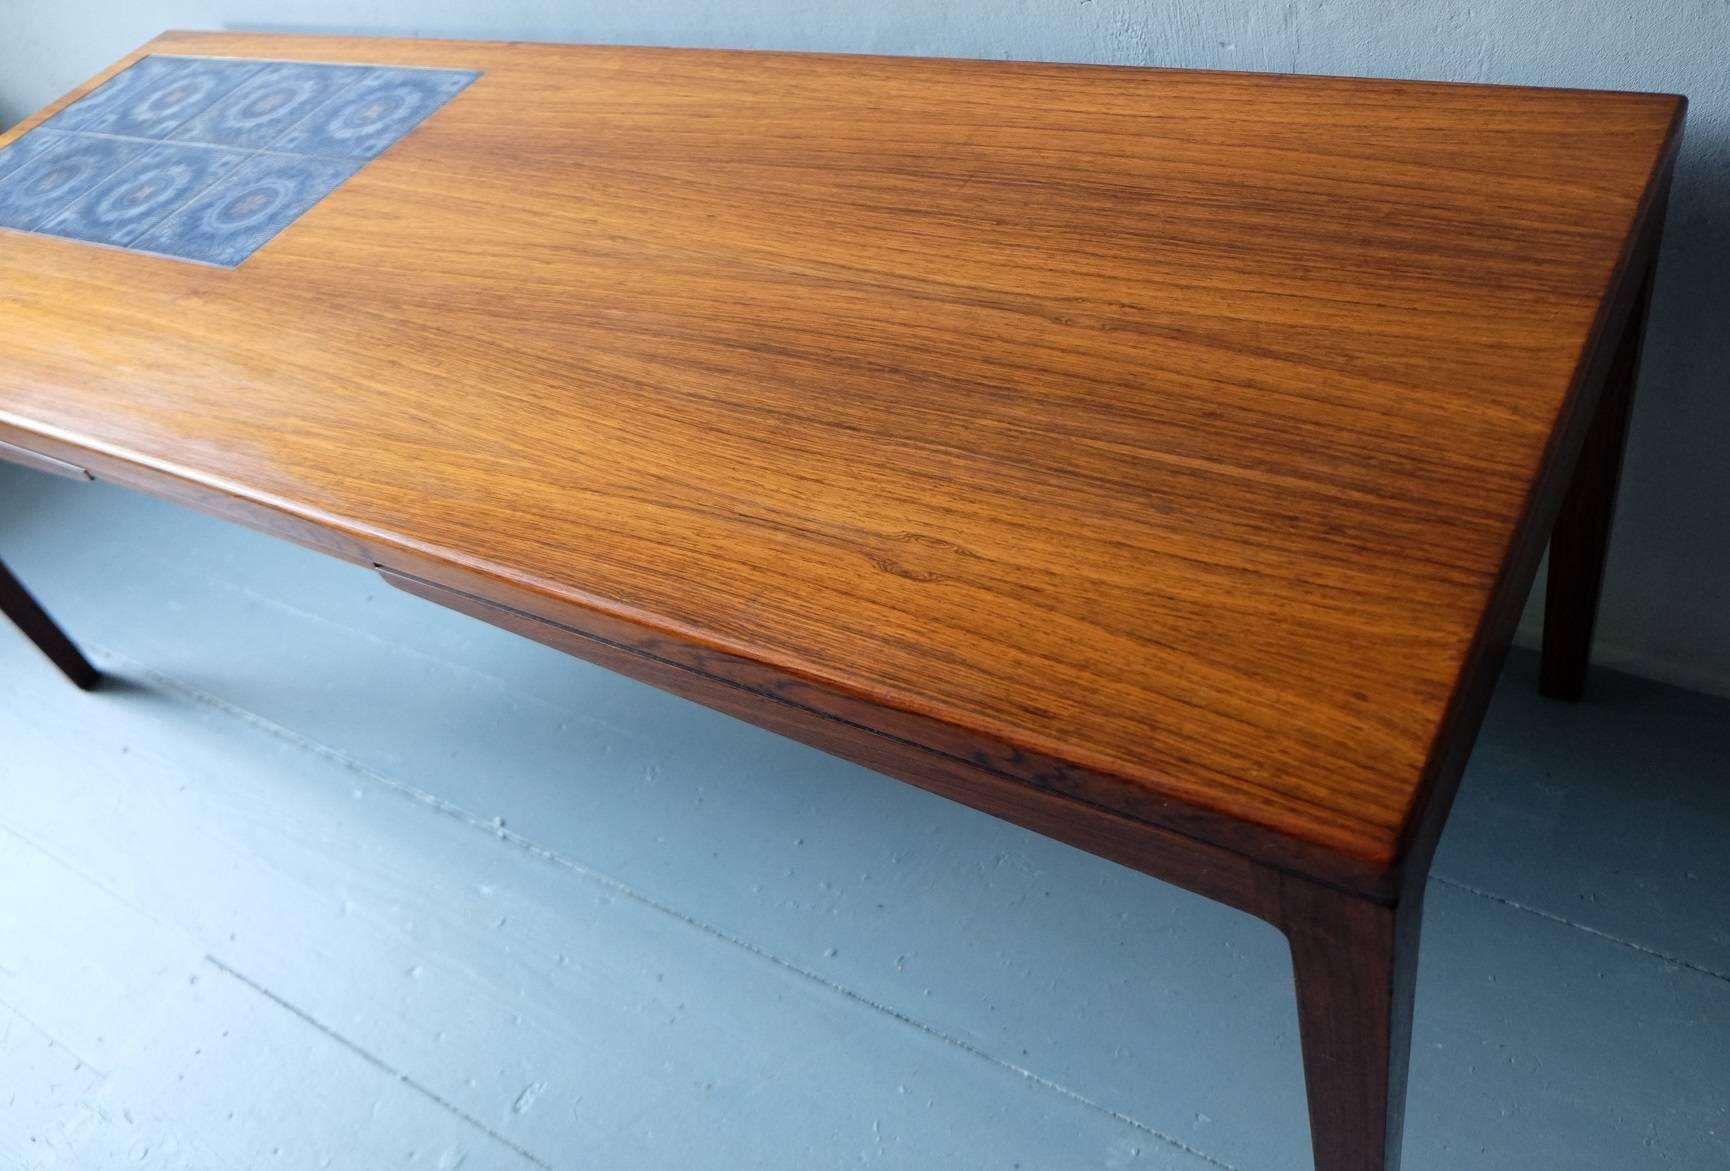 Coffee table in rosewood from Denmark, circa 1960.
The table has finely made mosaic ceramic tiles set into the wood and has an unusual design.
 